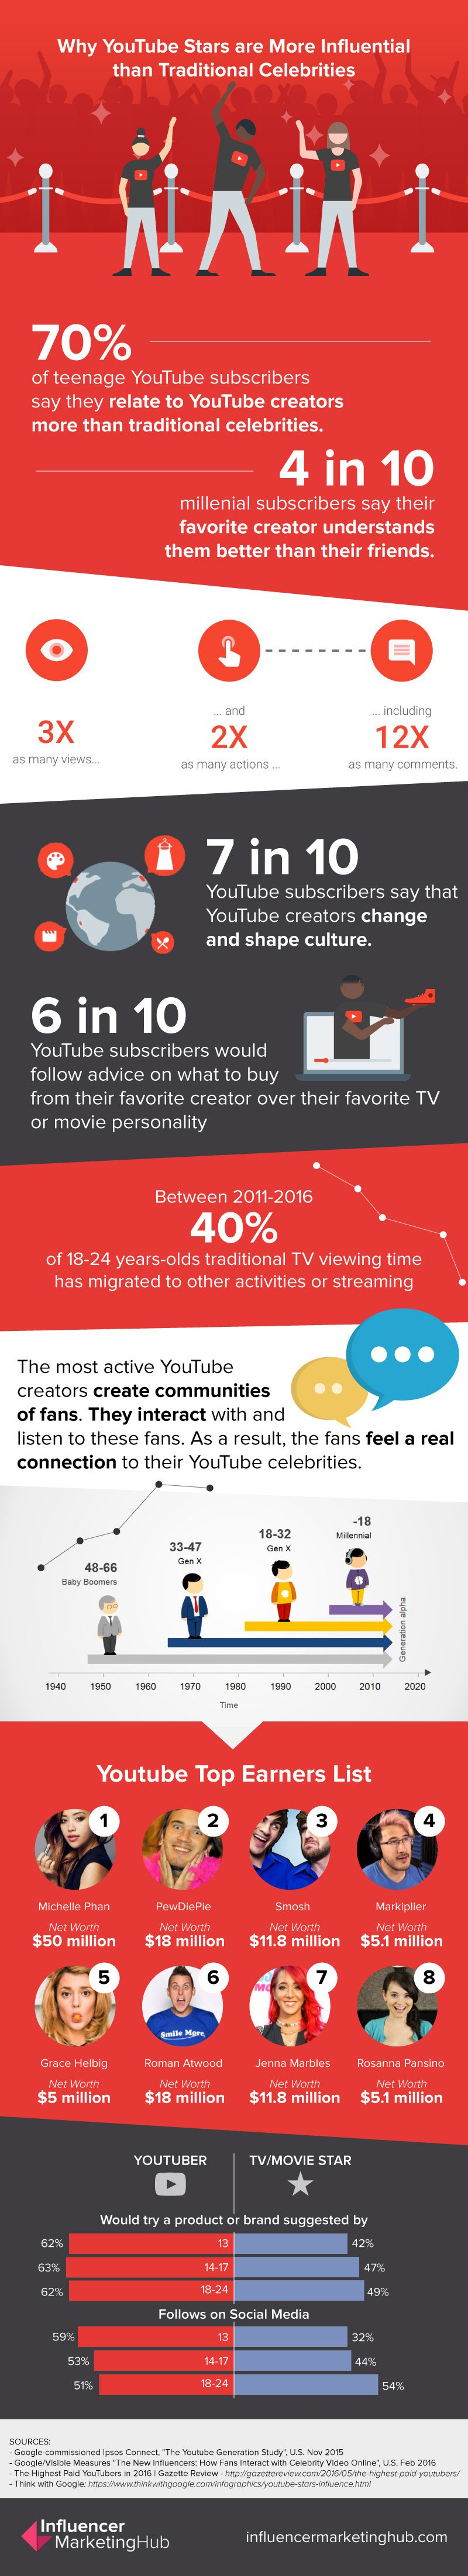 An infographic that shows Why YouTube Stars are More Influential than Traditional Celebrities